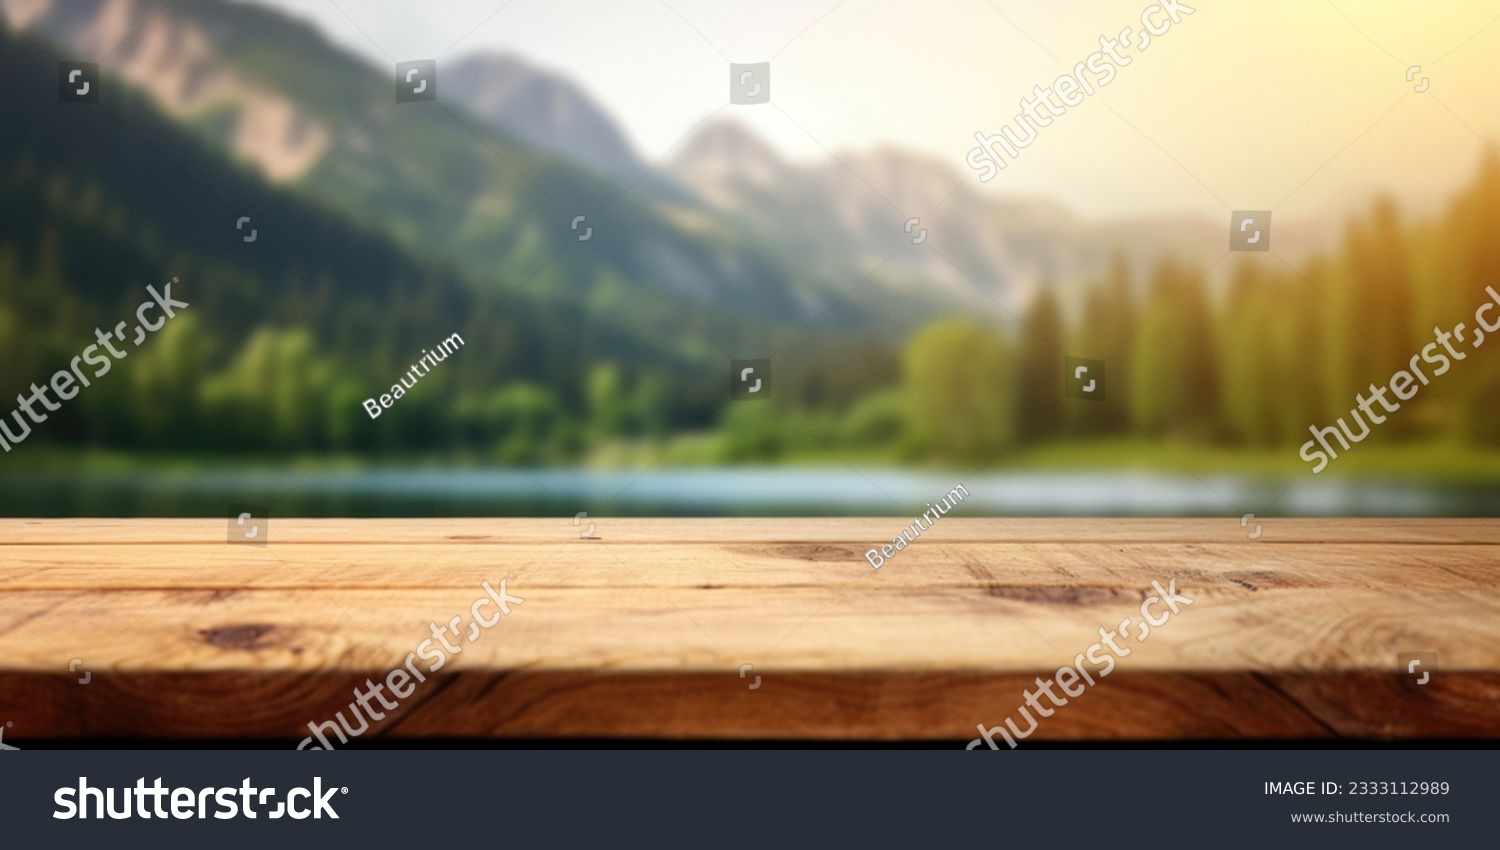 The empty wooden table top with blur background of summer lakes mountain. Exuberant image. #2333112989